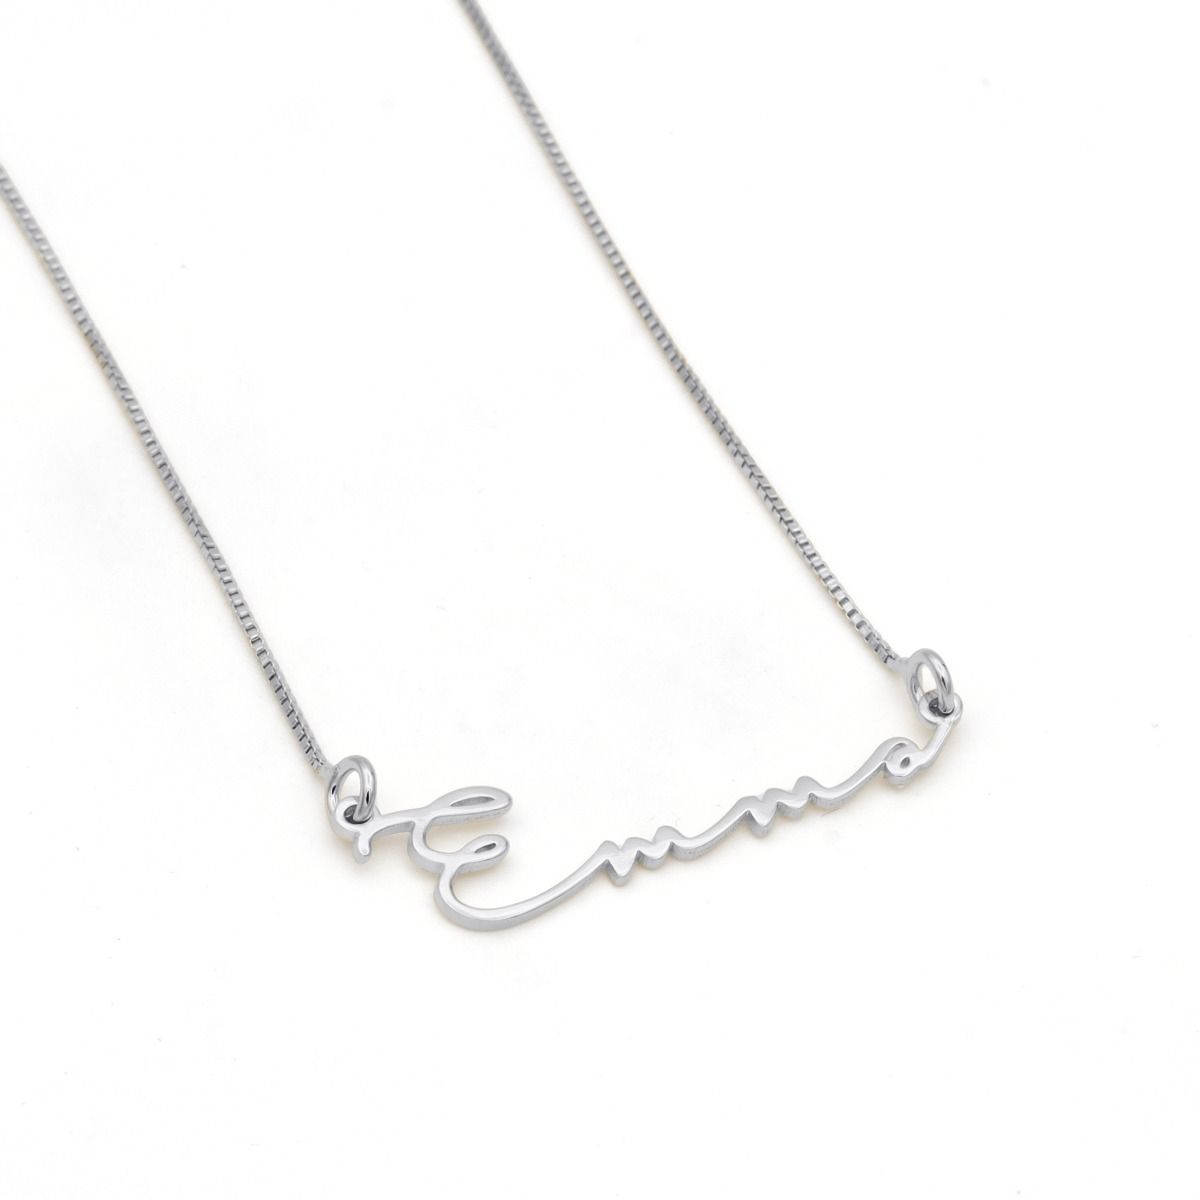 Hexa Bar Name Necklace for Men - Sterling Silver / Black Cord by Talisa